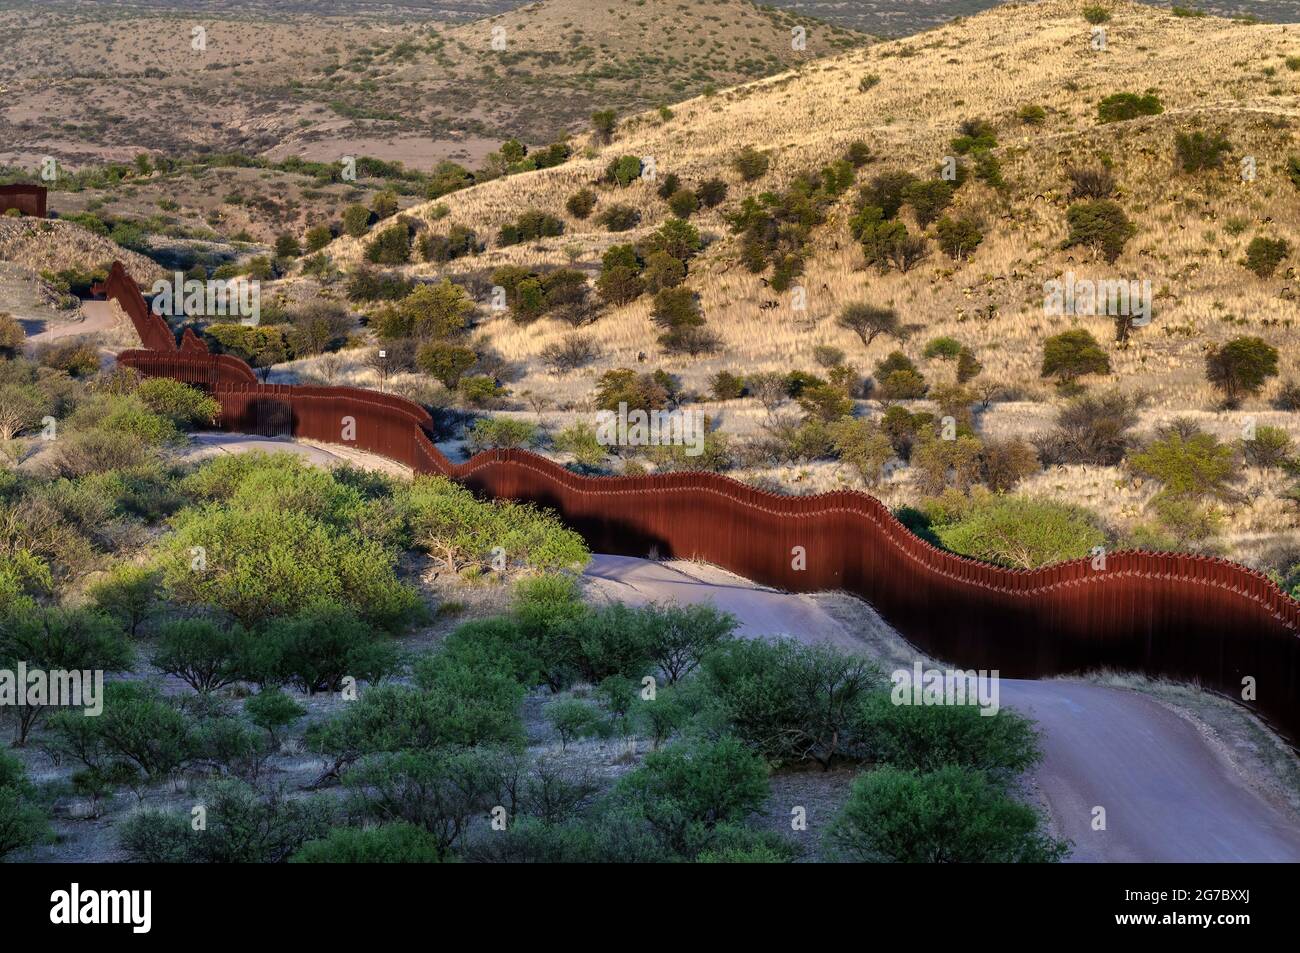 US border fence on the Mexico border, east of Nogales Arizona and Nogales Sonora Mexico, viewed from US side looking south east. This type of barrier Stock Photo